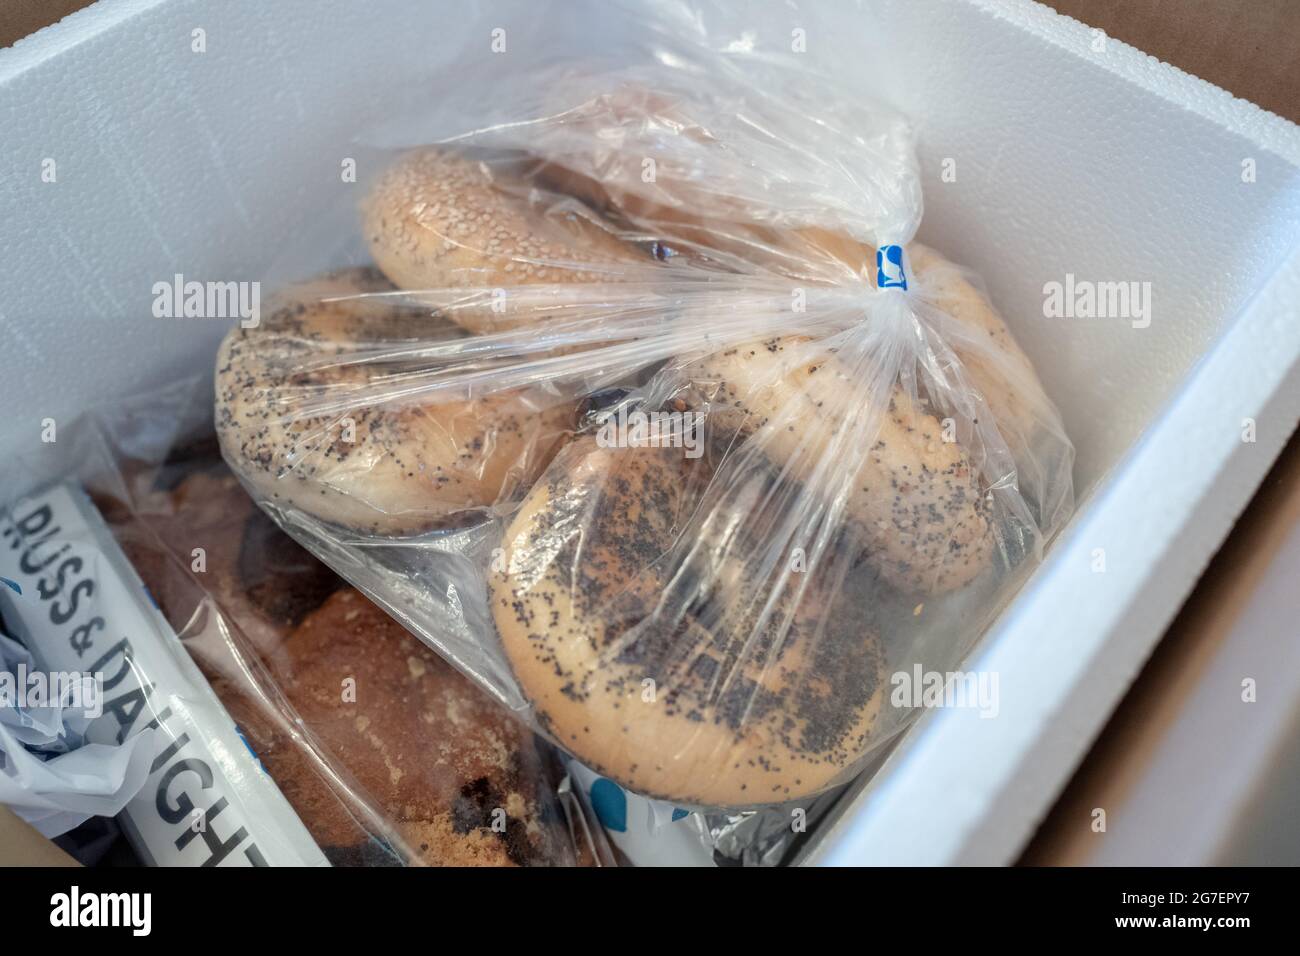 Bagels, coffee and other contents of a Russ and Daughters delivery box in Lafayette, California, part of an artisan food delivery program, June 15, 2021. () Stock Photo